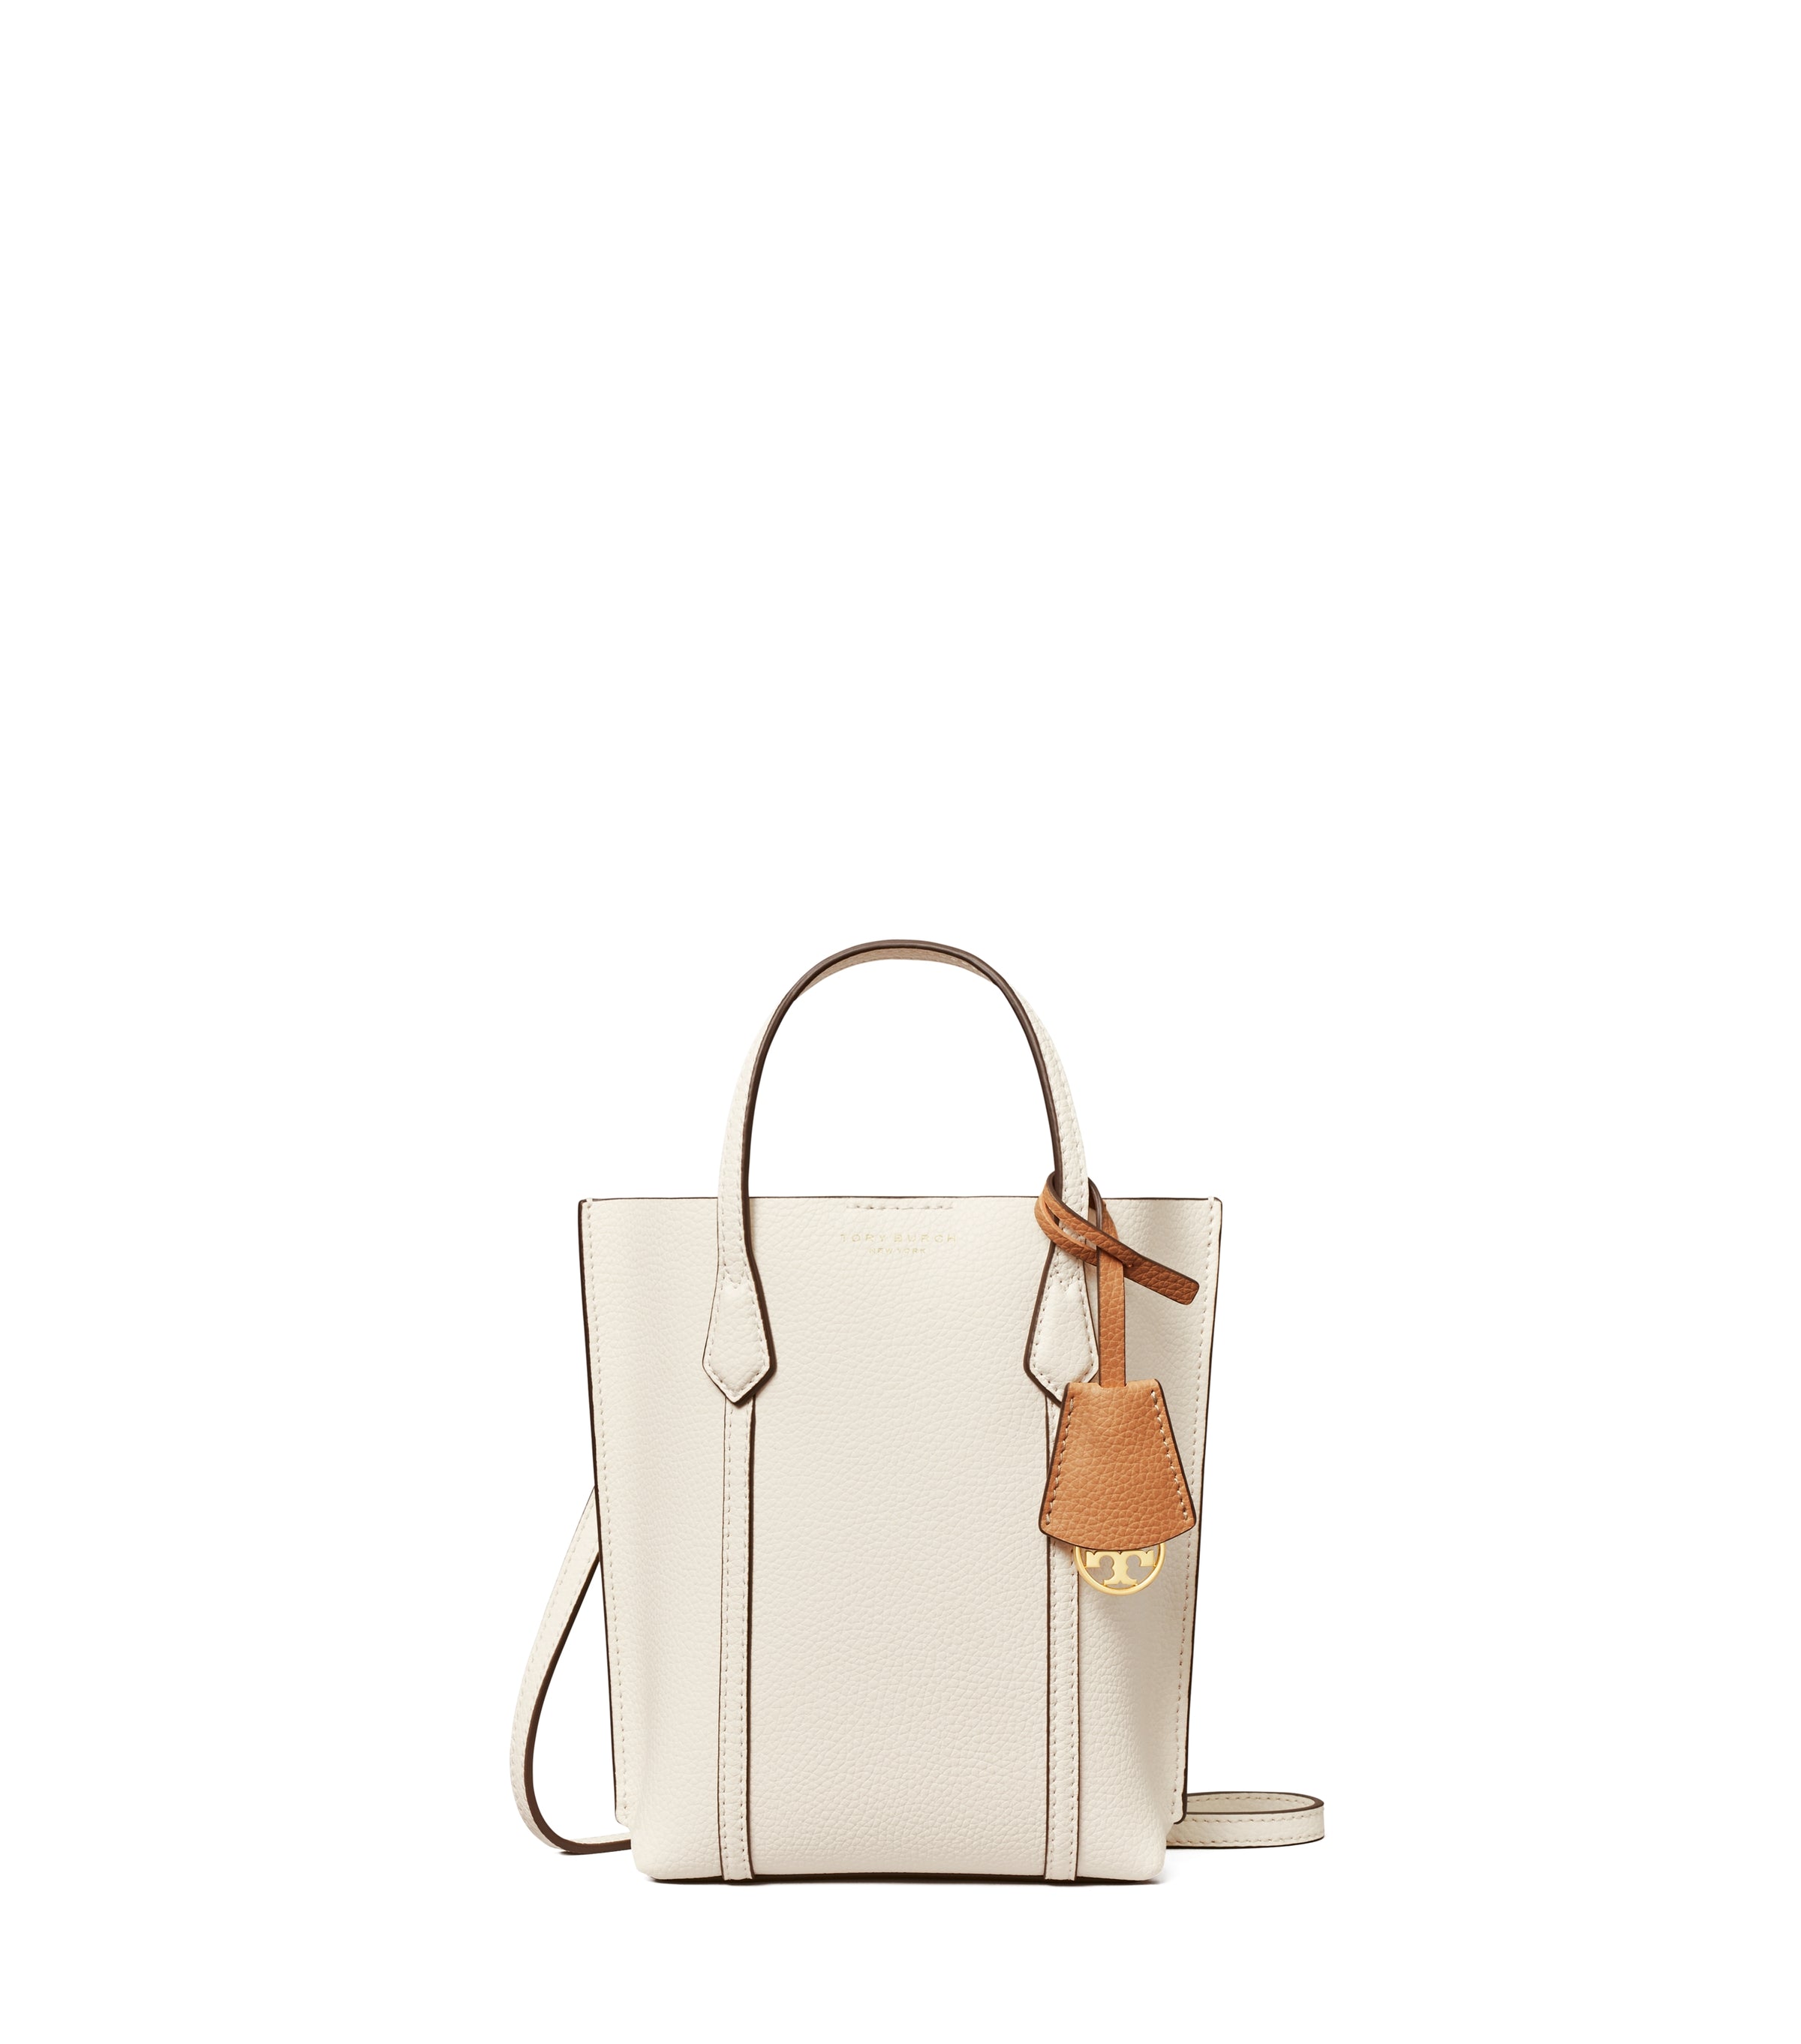 Tory Burch Perry Leather Tote Bag - White